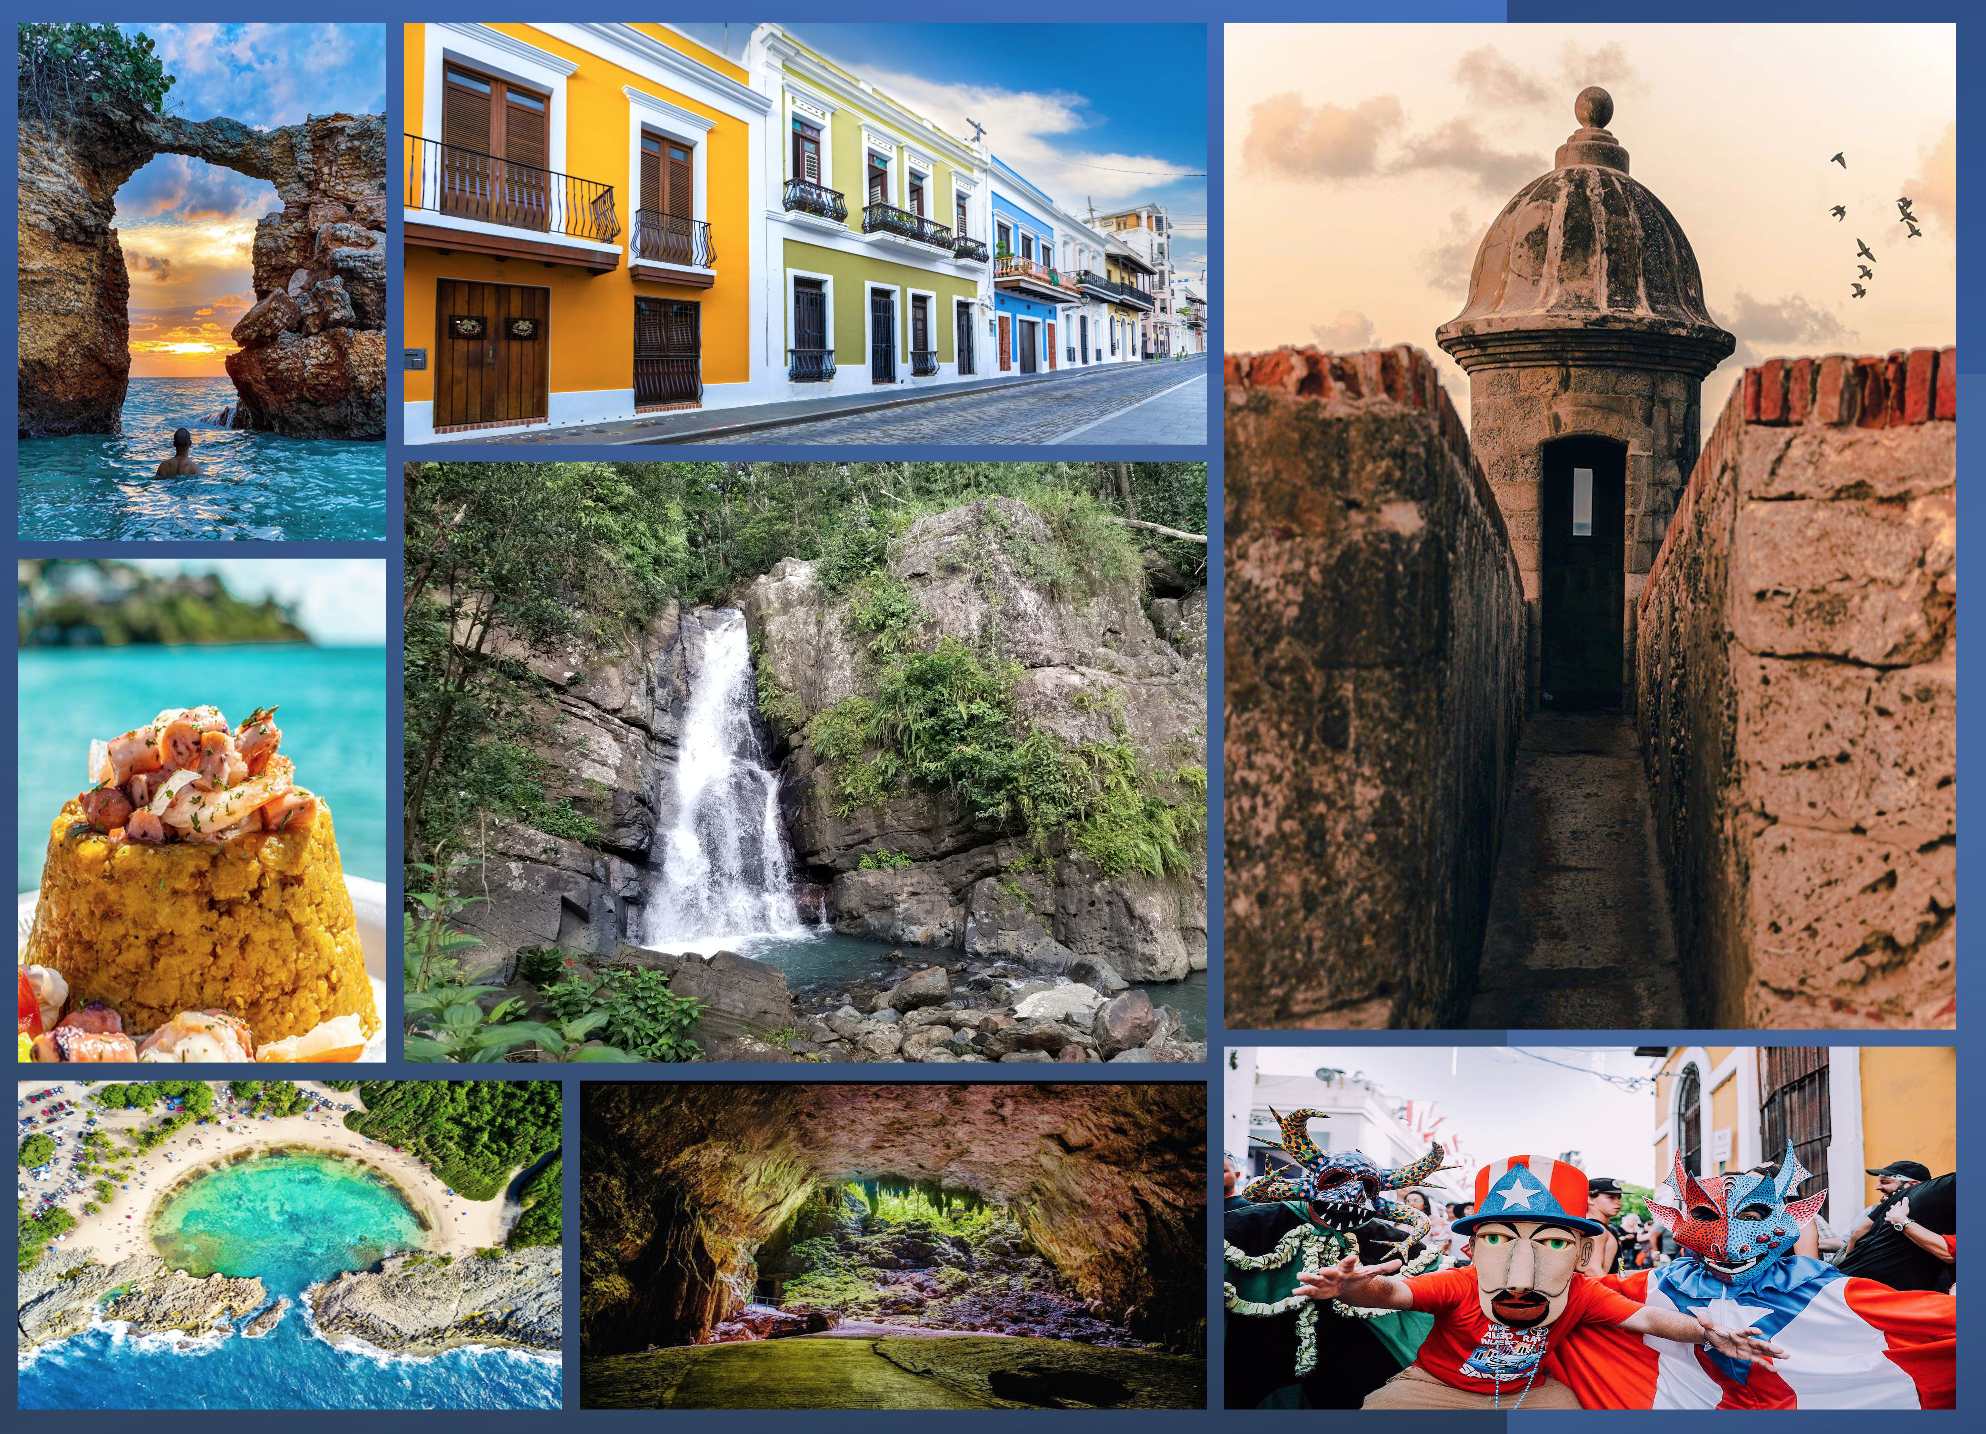 A collage of photos from Puerto Rico, including a waterfall, a church, rowhouses, and a lagoon